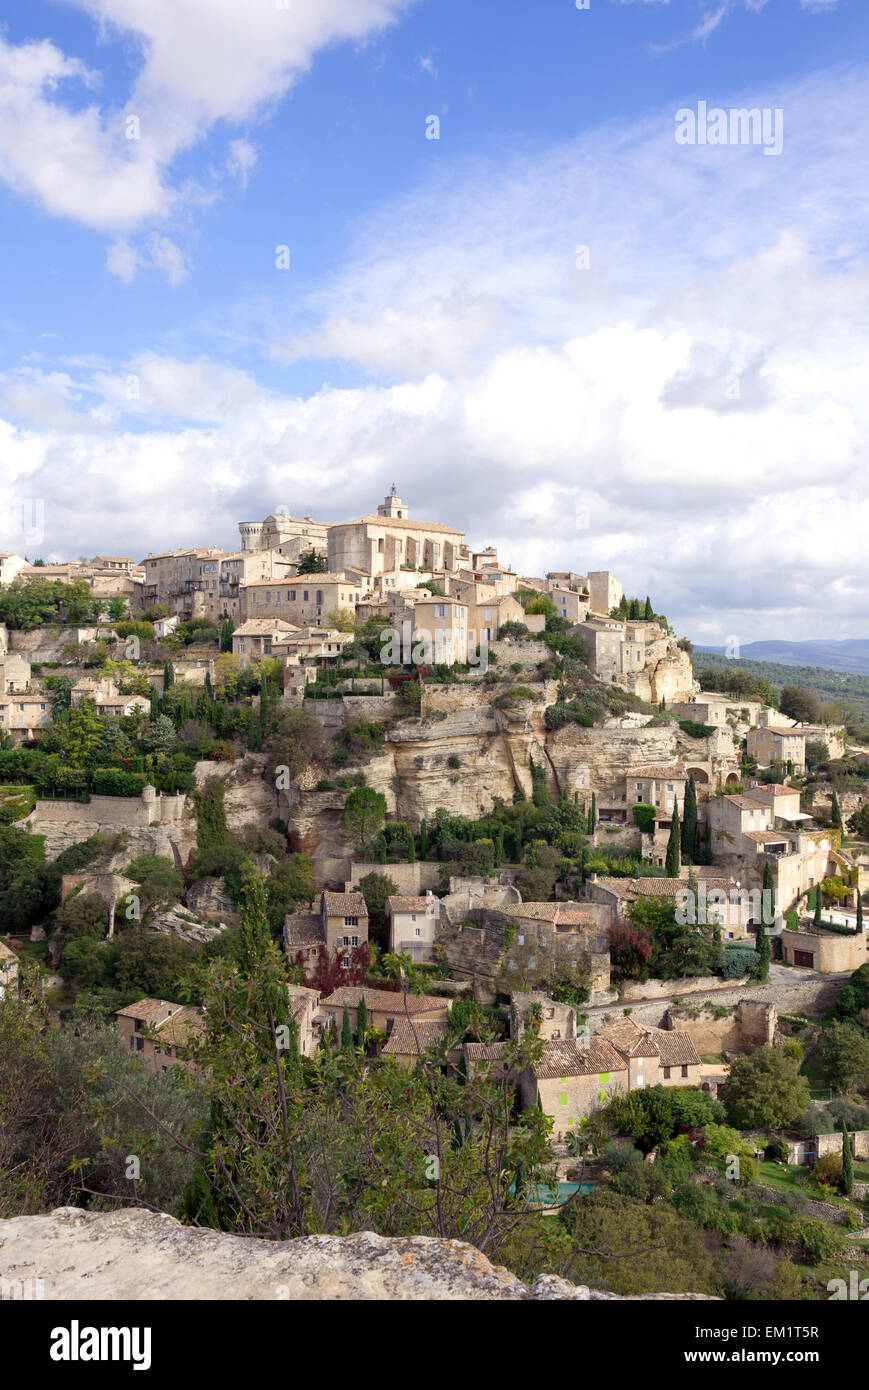 Distance view of hilltop village of Gordes, Luberon area of Provence, France. Stock Photo